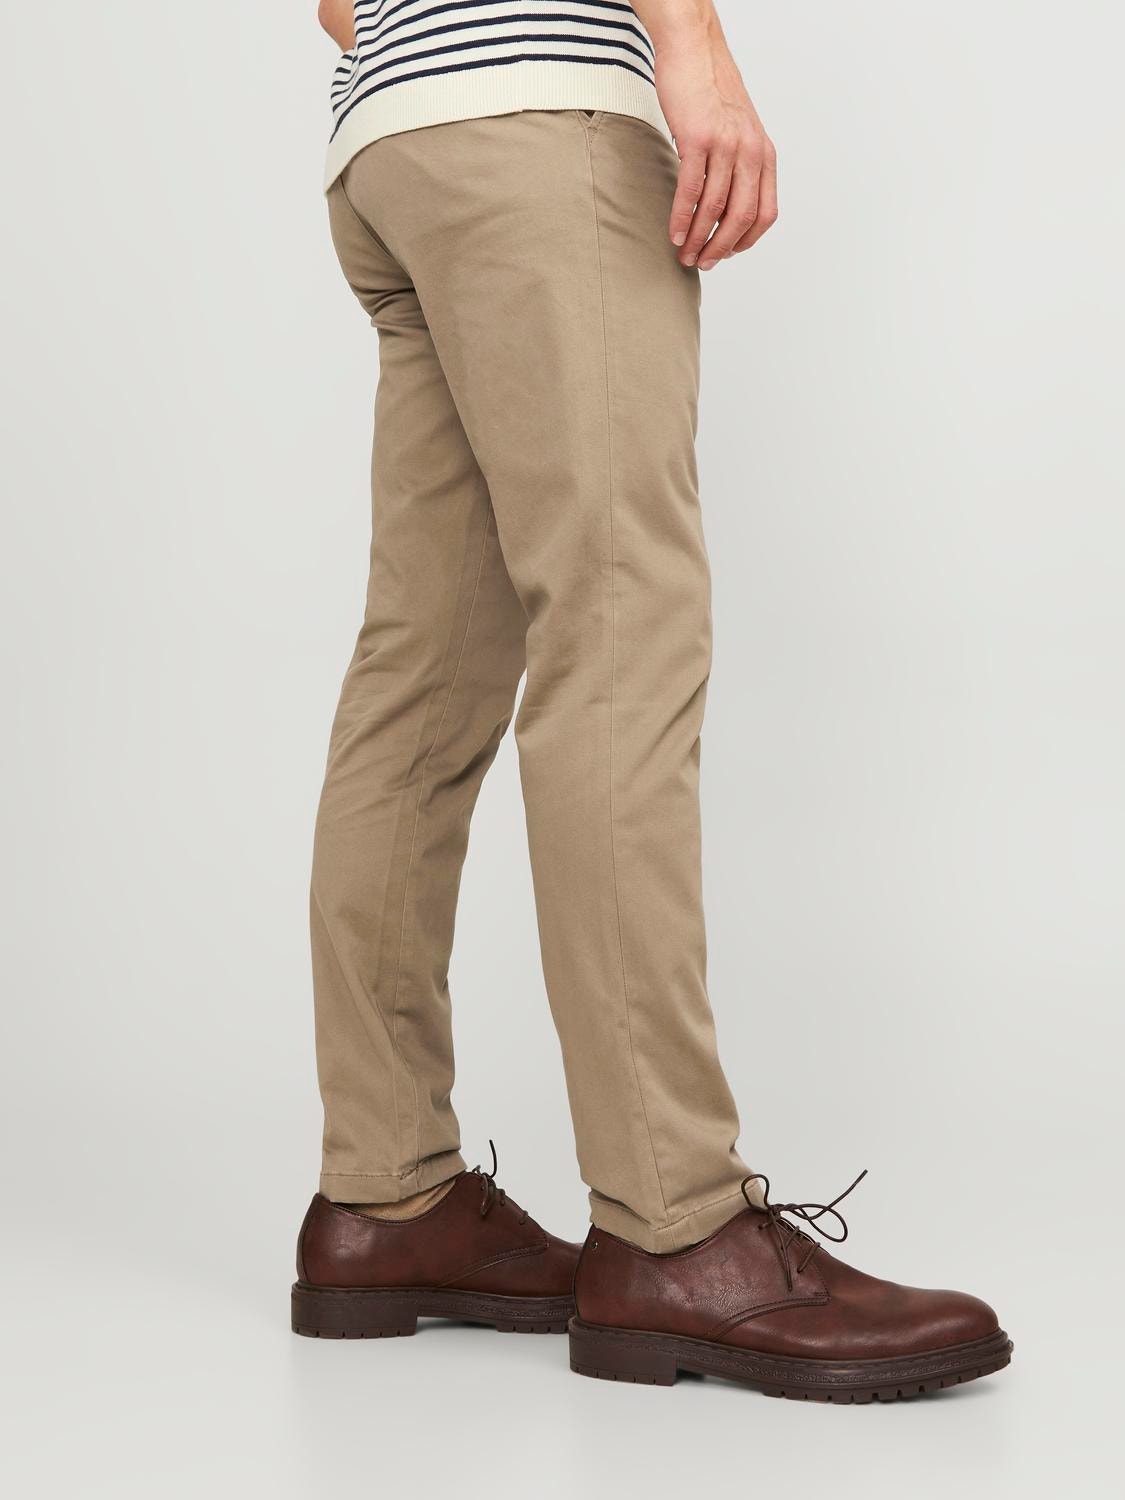 Fitness Chinos, Trousers, Pants